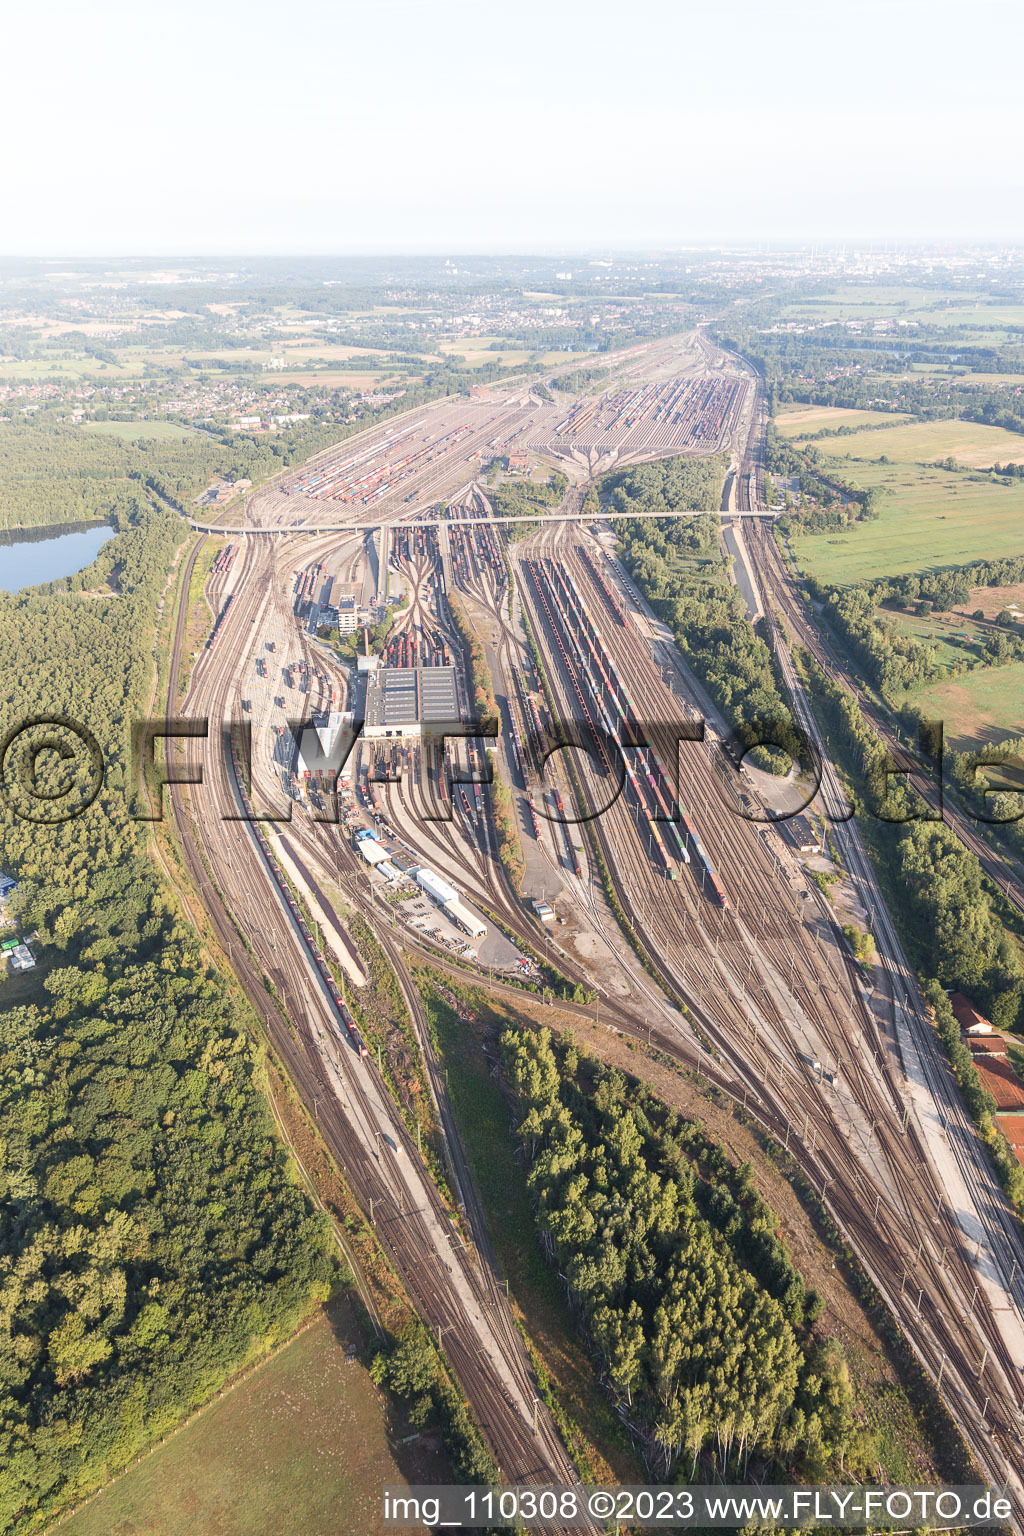 Marshalling yard and freight station Maschen of the Deutsche Bahn in the district Maschen in Seevetal in the state Lower Saxony, Germany seen from a drone